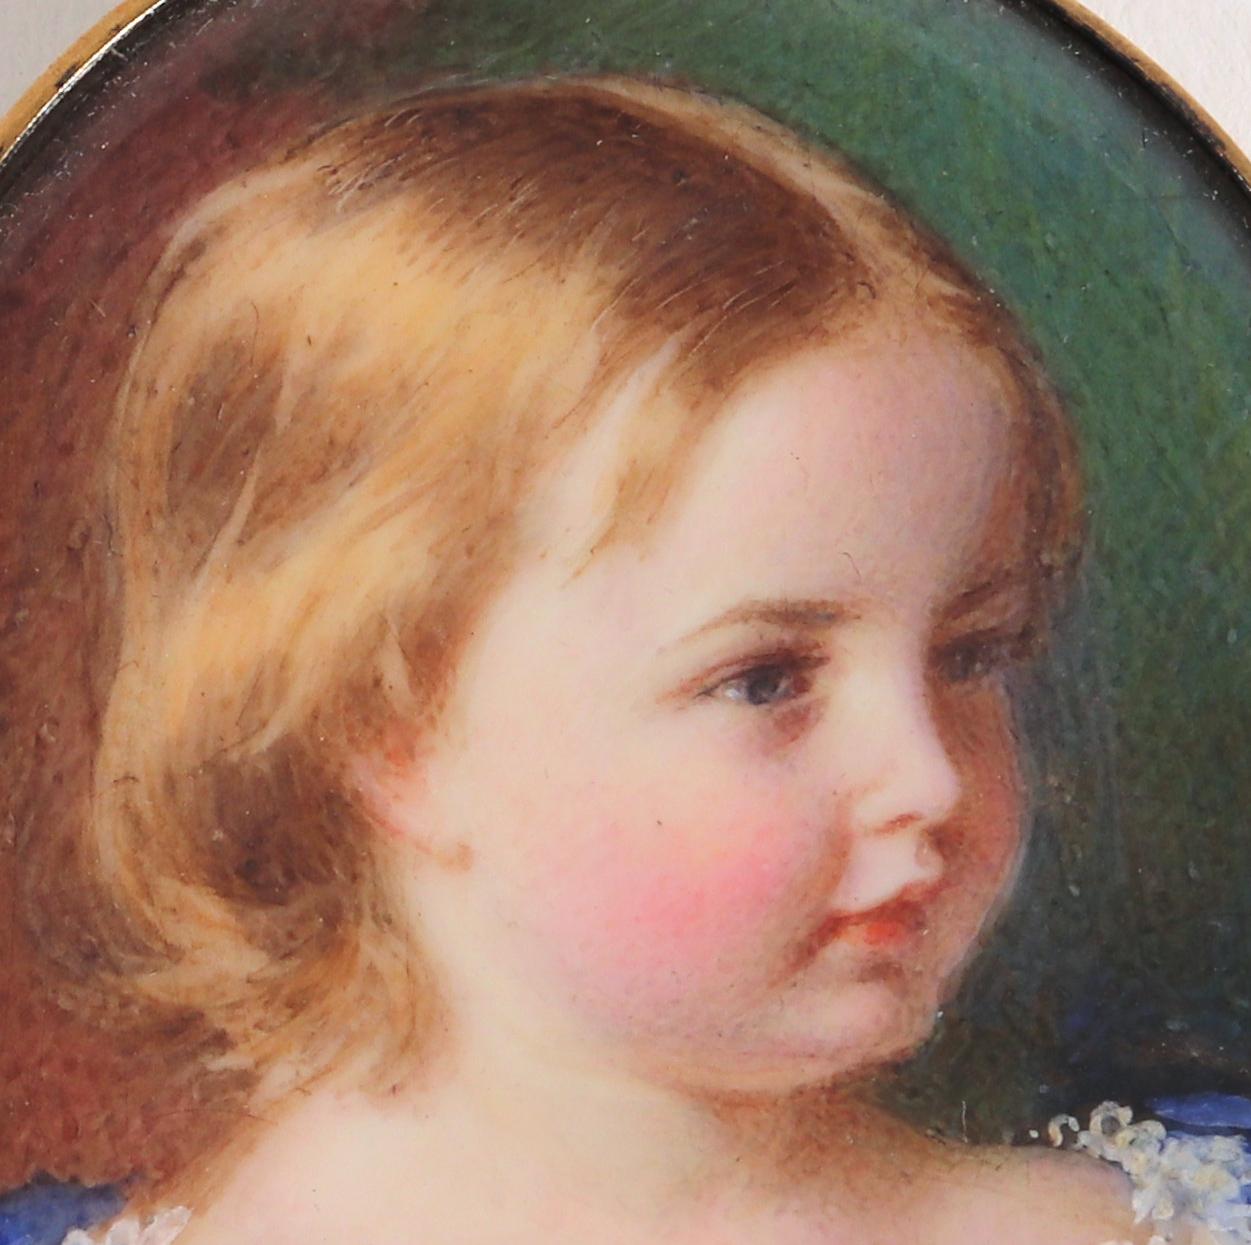 English portrait miniature of a young girl, 
Edward Tayler,
Dated 1863 

The English portrait miniature depicts a naturalistically painted view of a young girl's right face and upper torso. The girl has rosy cheeks and red hair parted in the center.